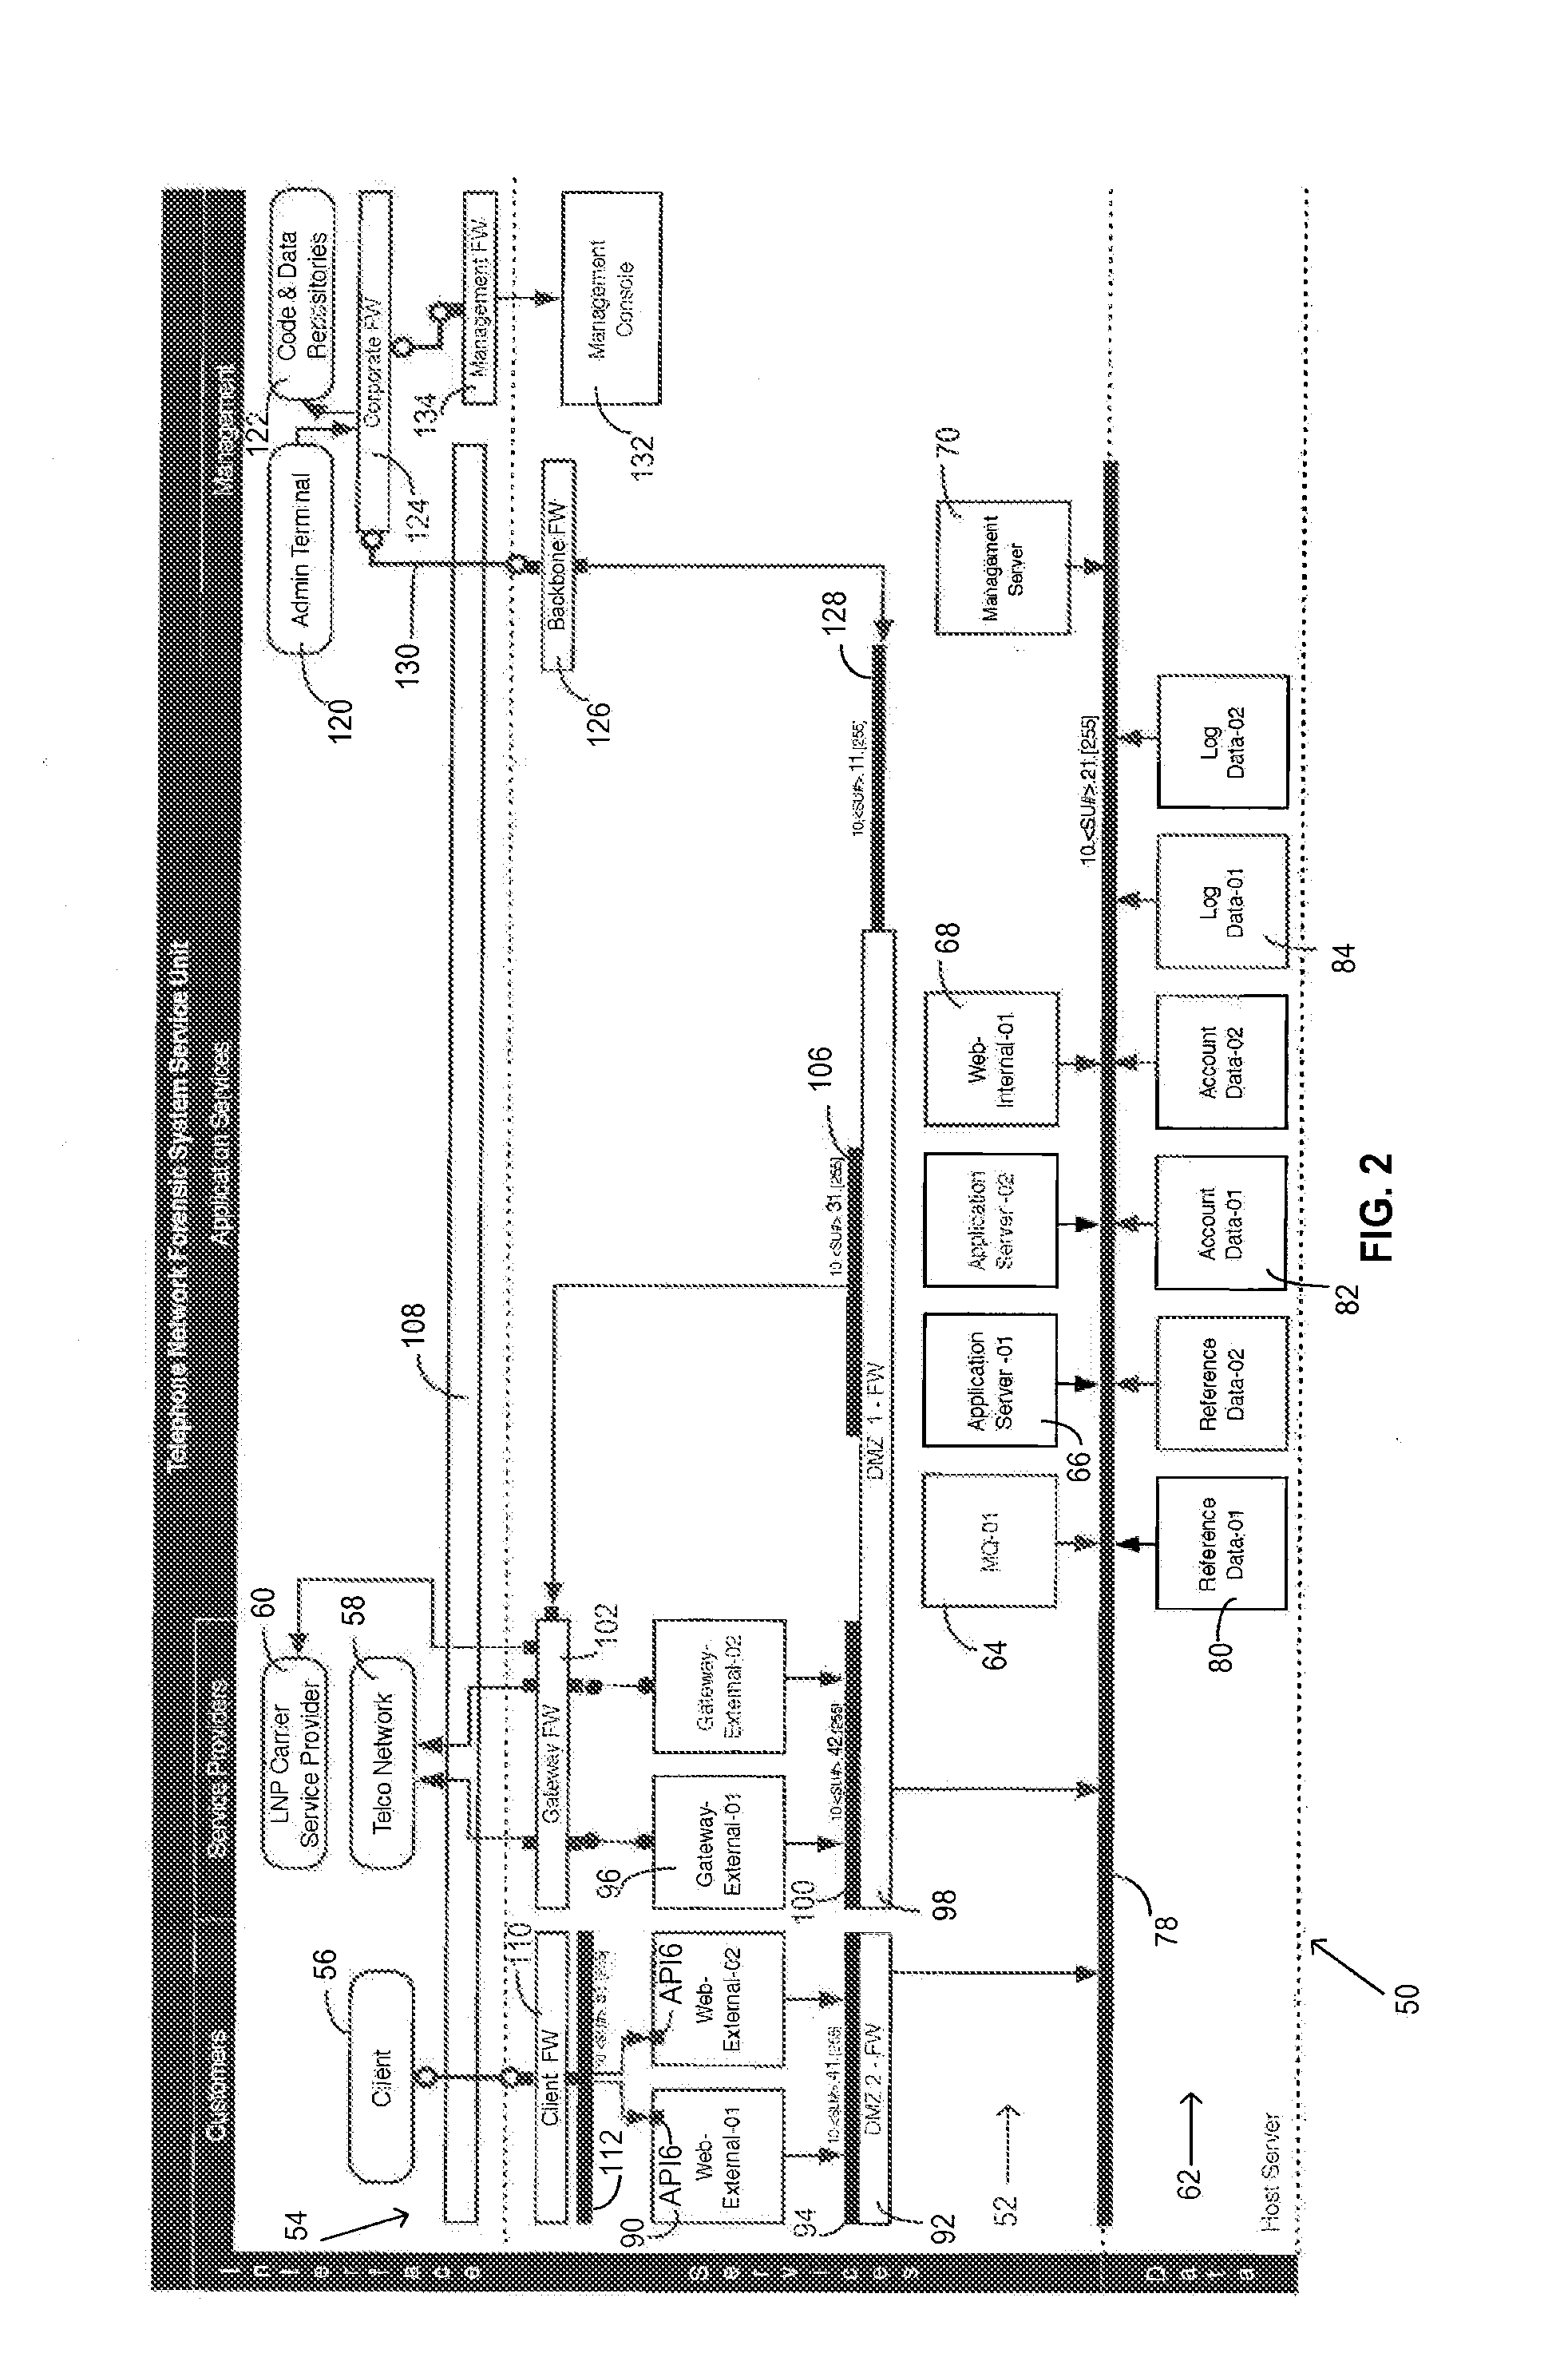 Method of and System for Discovering and Reporting Trustworthiness and Credibility of Calling Party Number Information